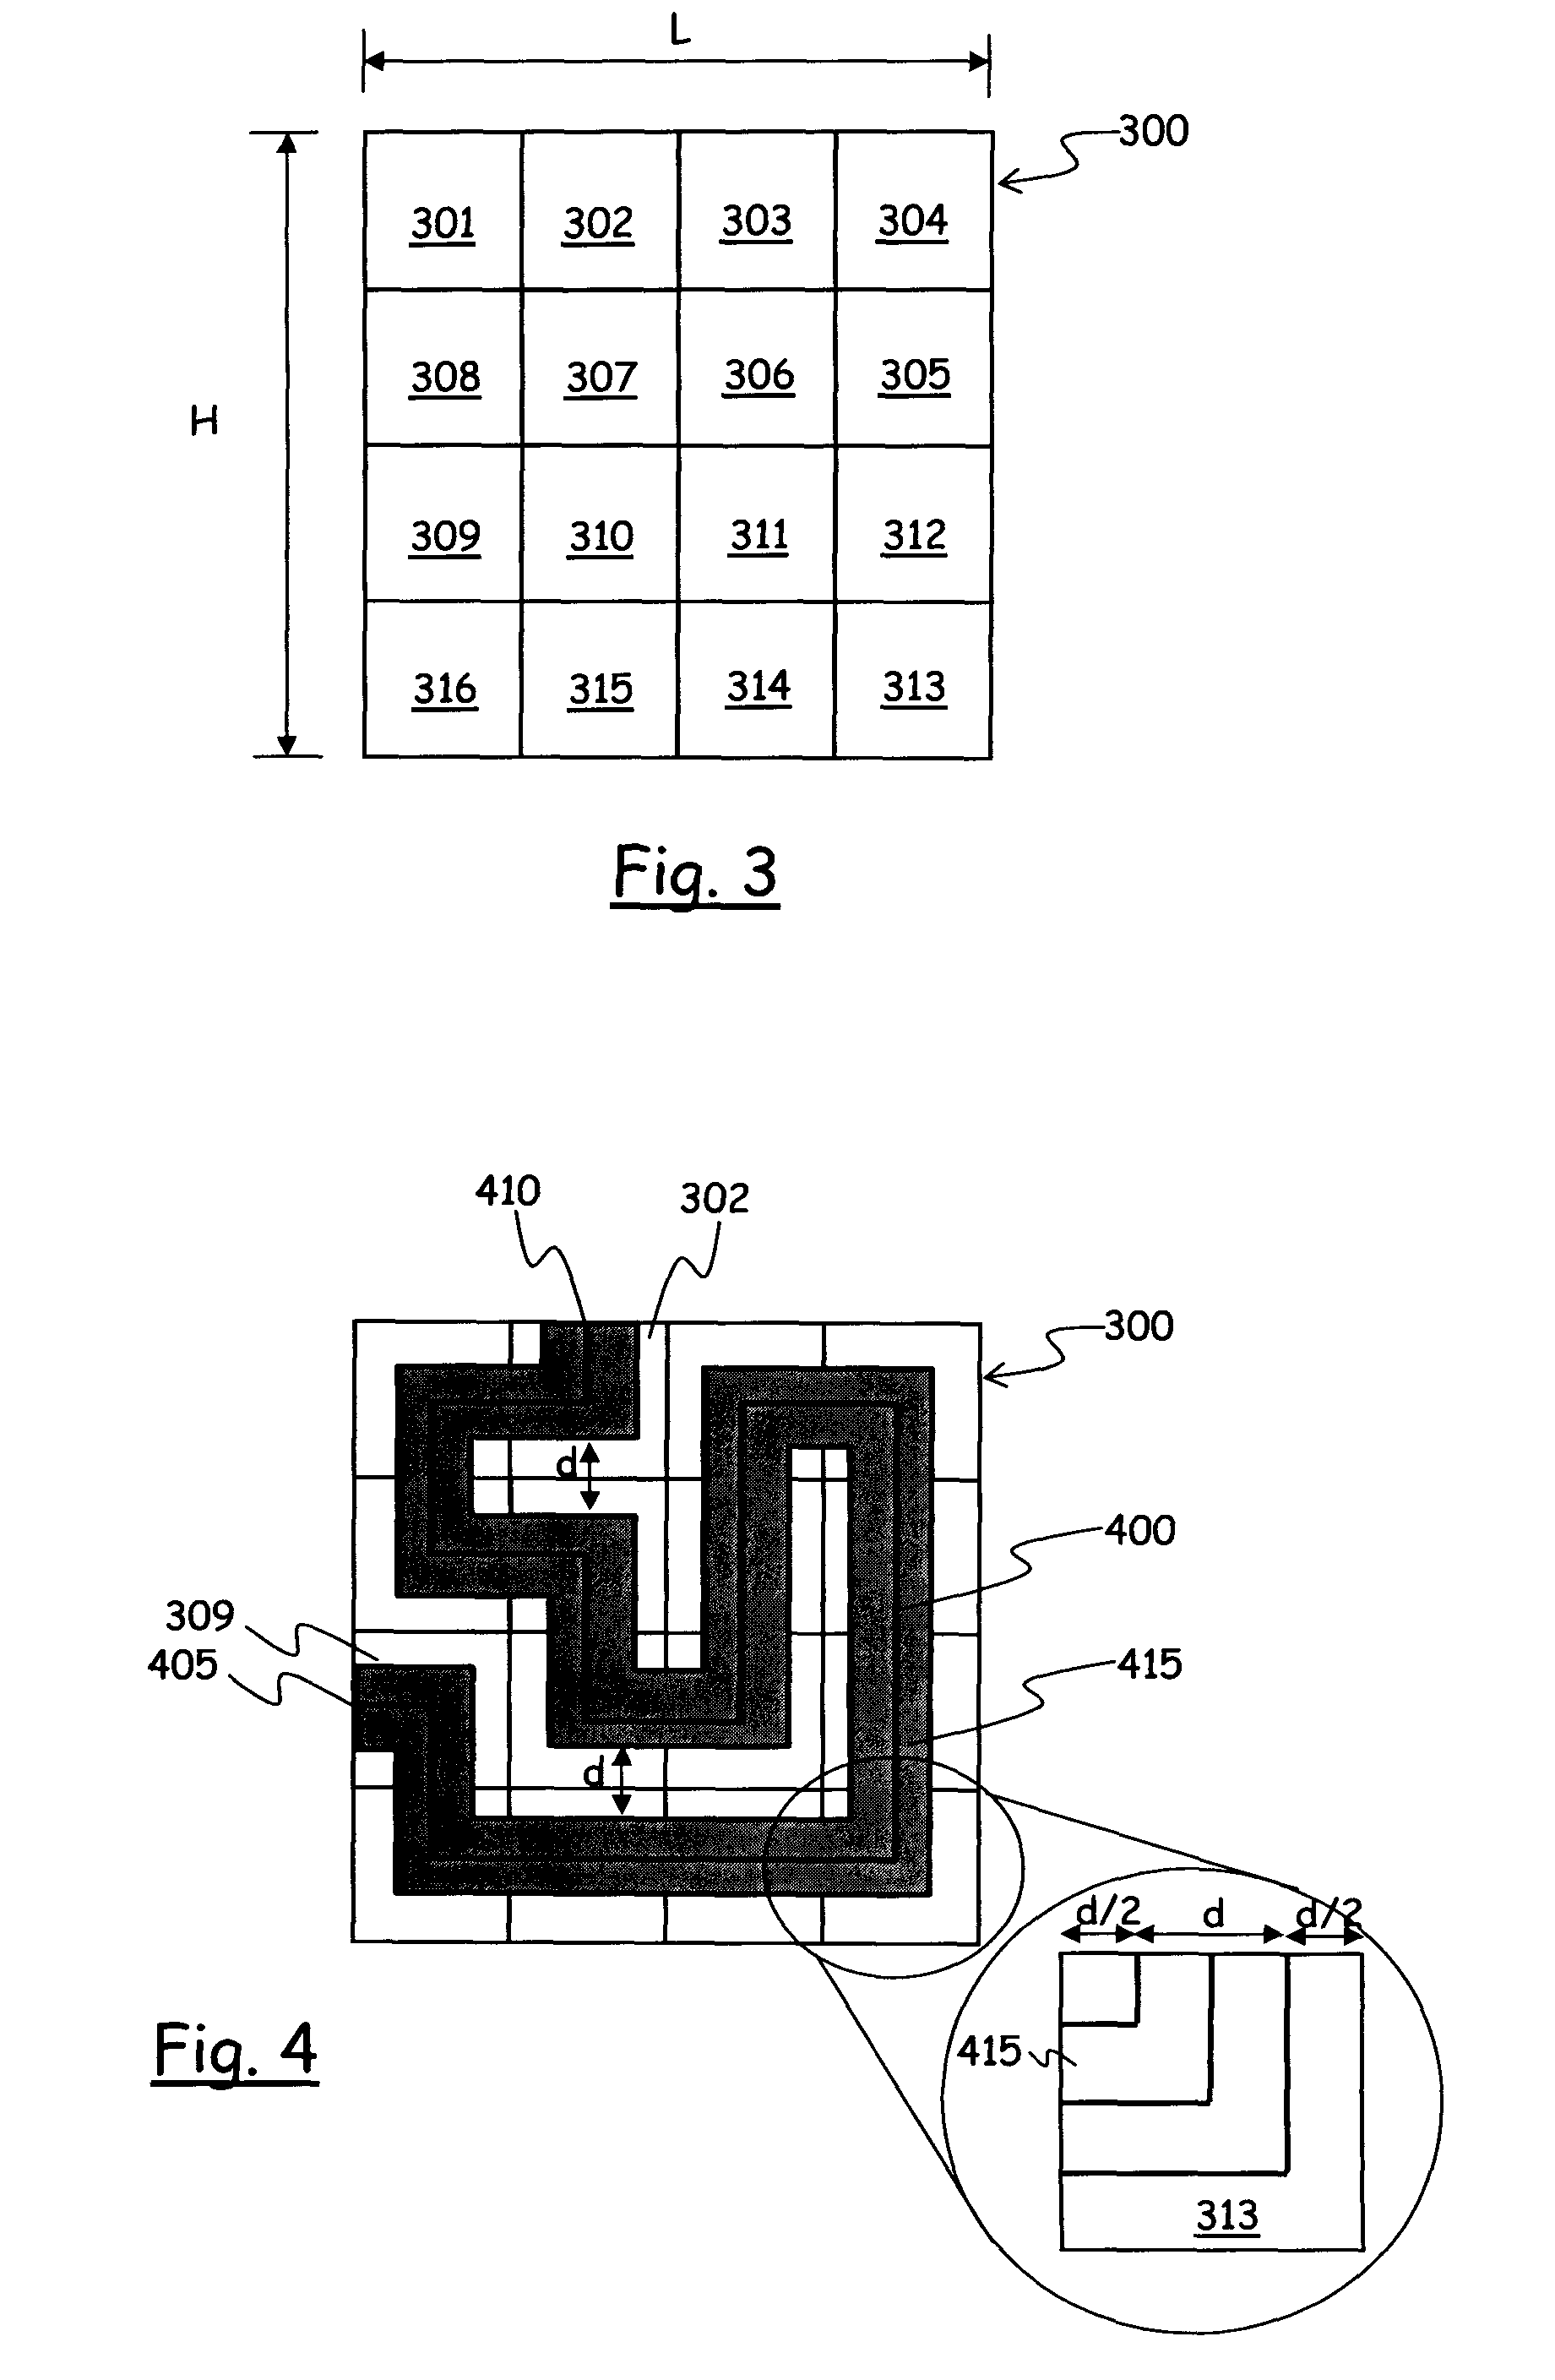 Tamper-proof structures for protecting electronic modules